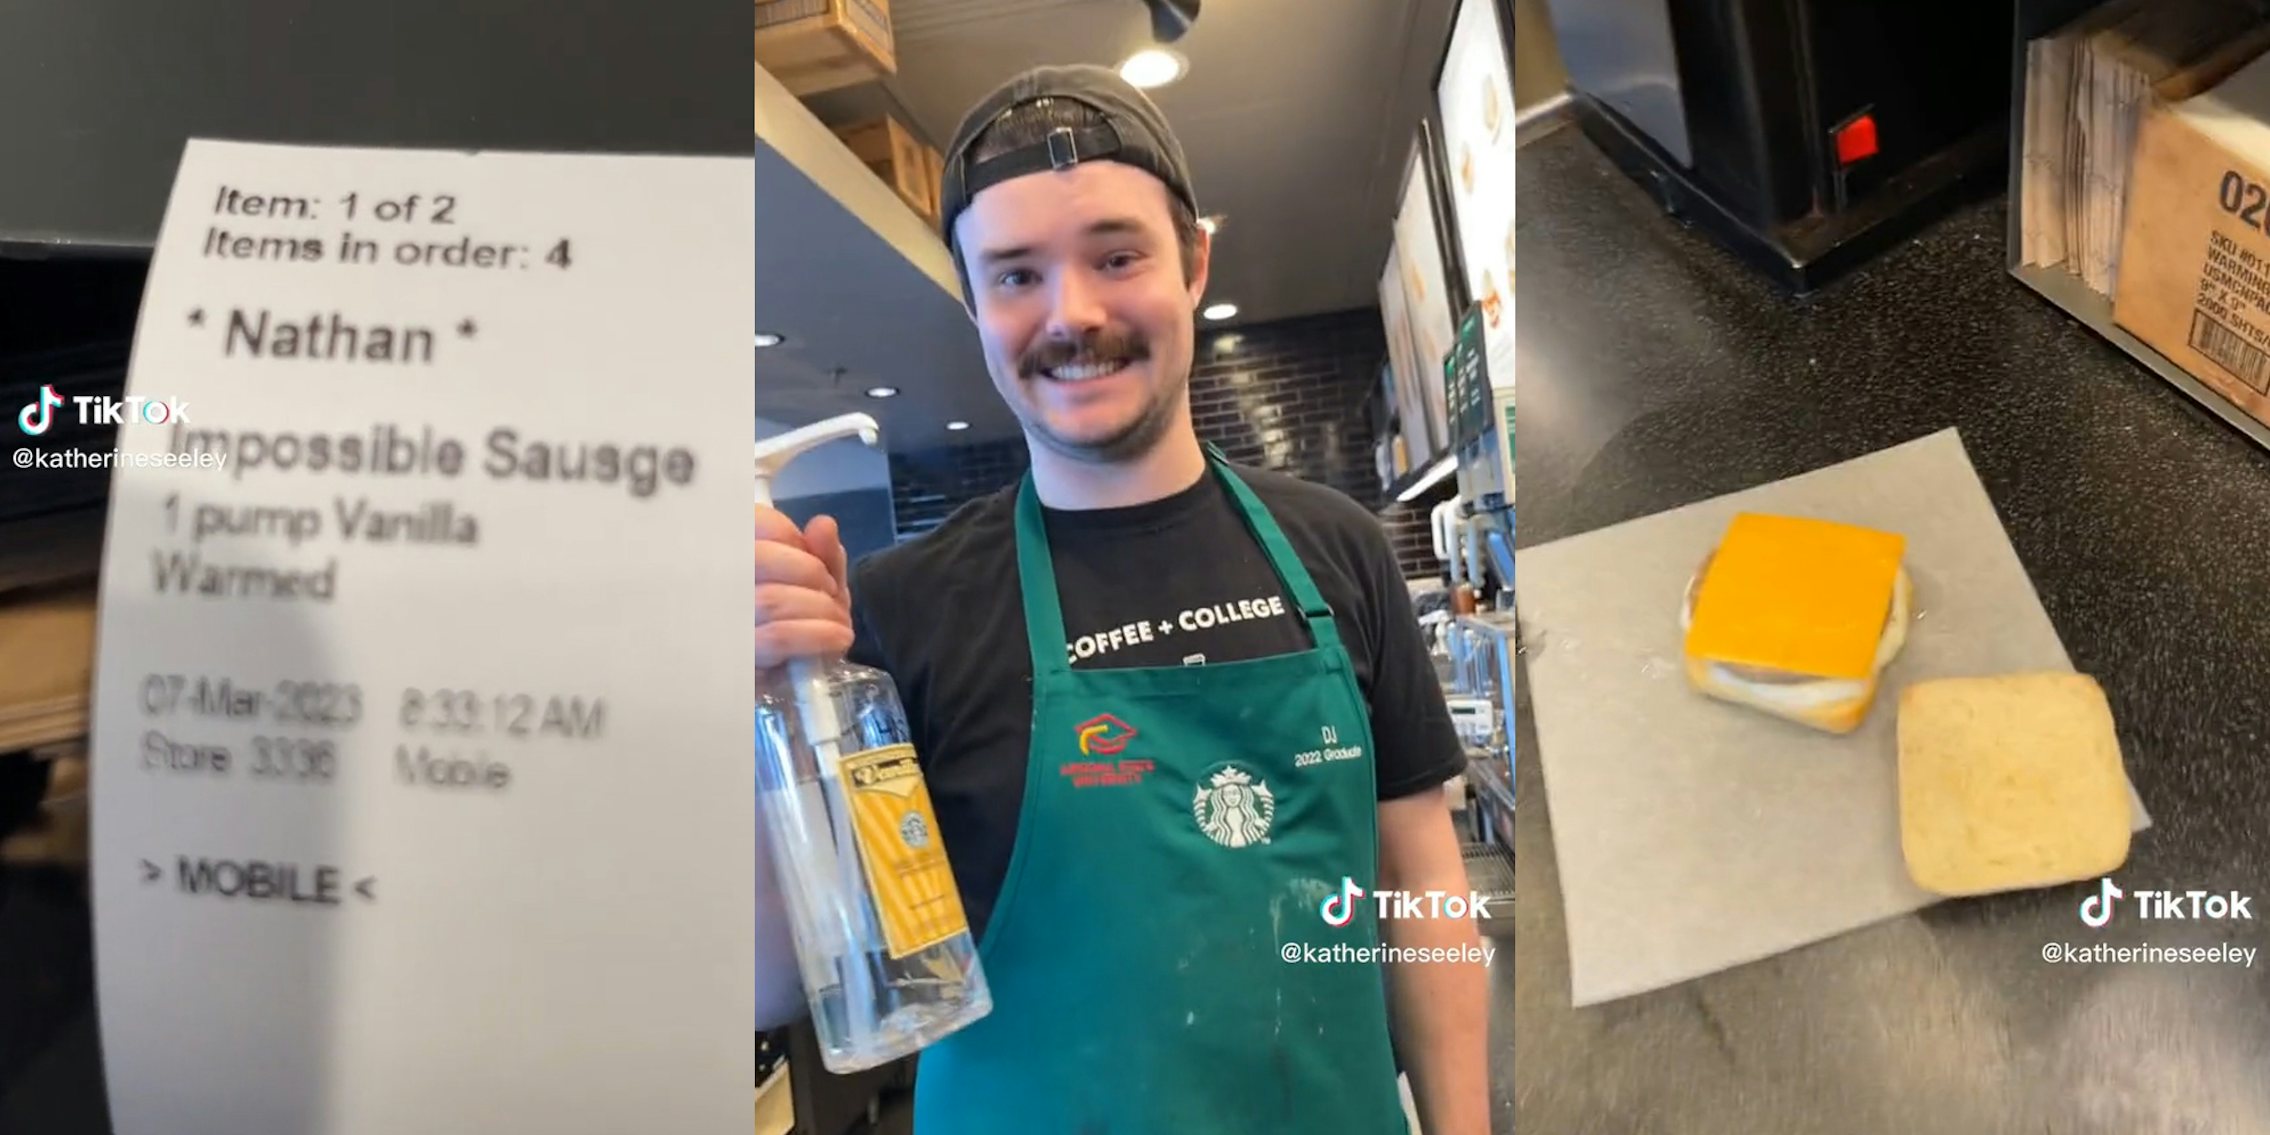 Starbucks employee shows receipt with order for Impossible Sausage, 1 pump vanilla, warmed